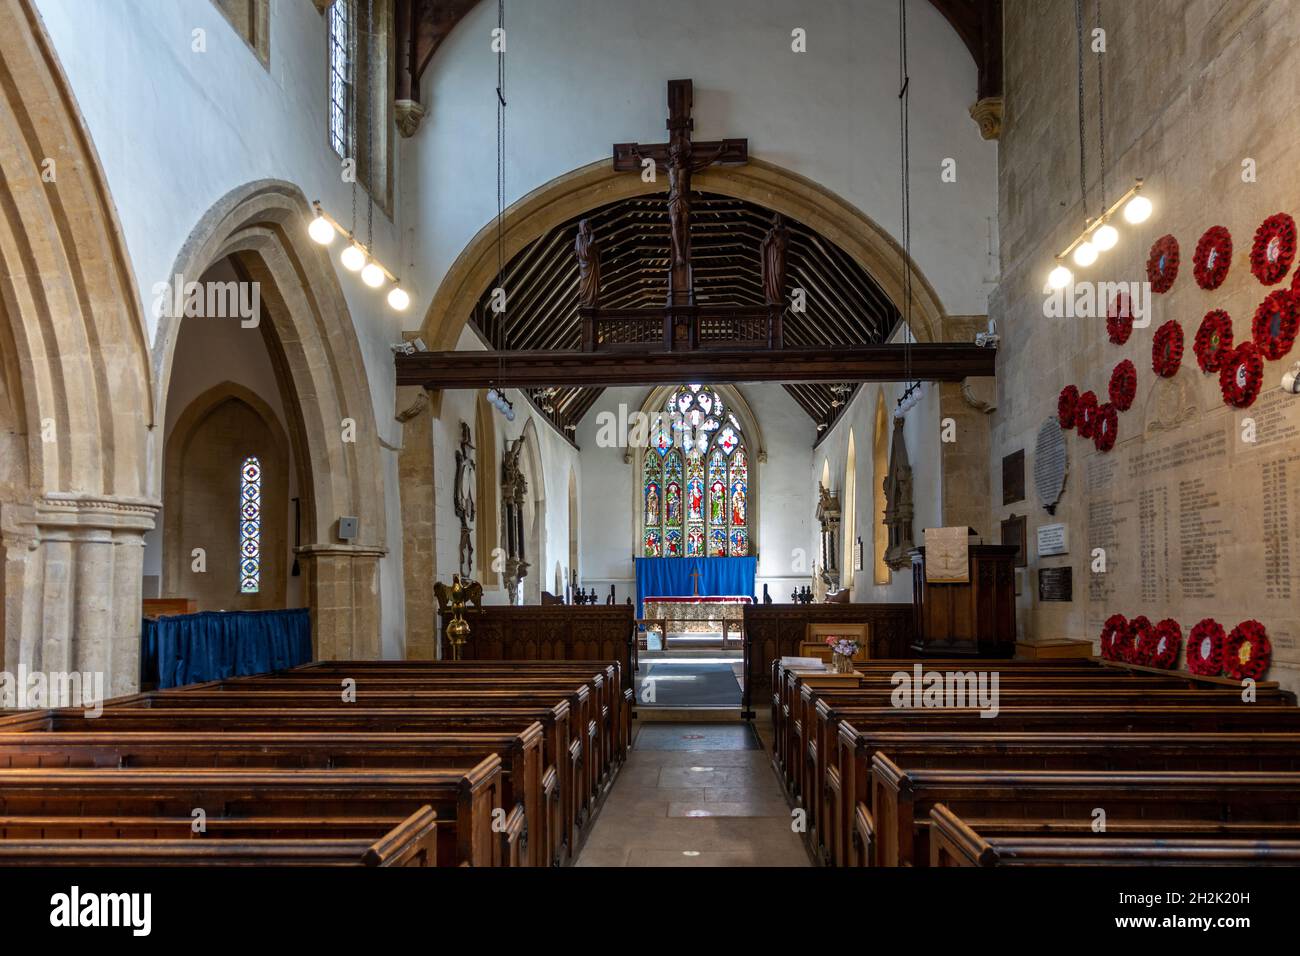 Innenraum der Pfarrkirche St. Edwards, Stow on the Wold Town, Gloucestershire, Cotswolds, England Stockfoto